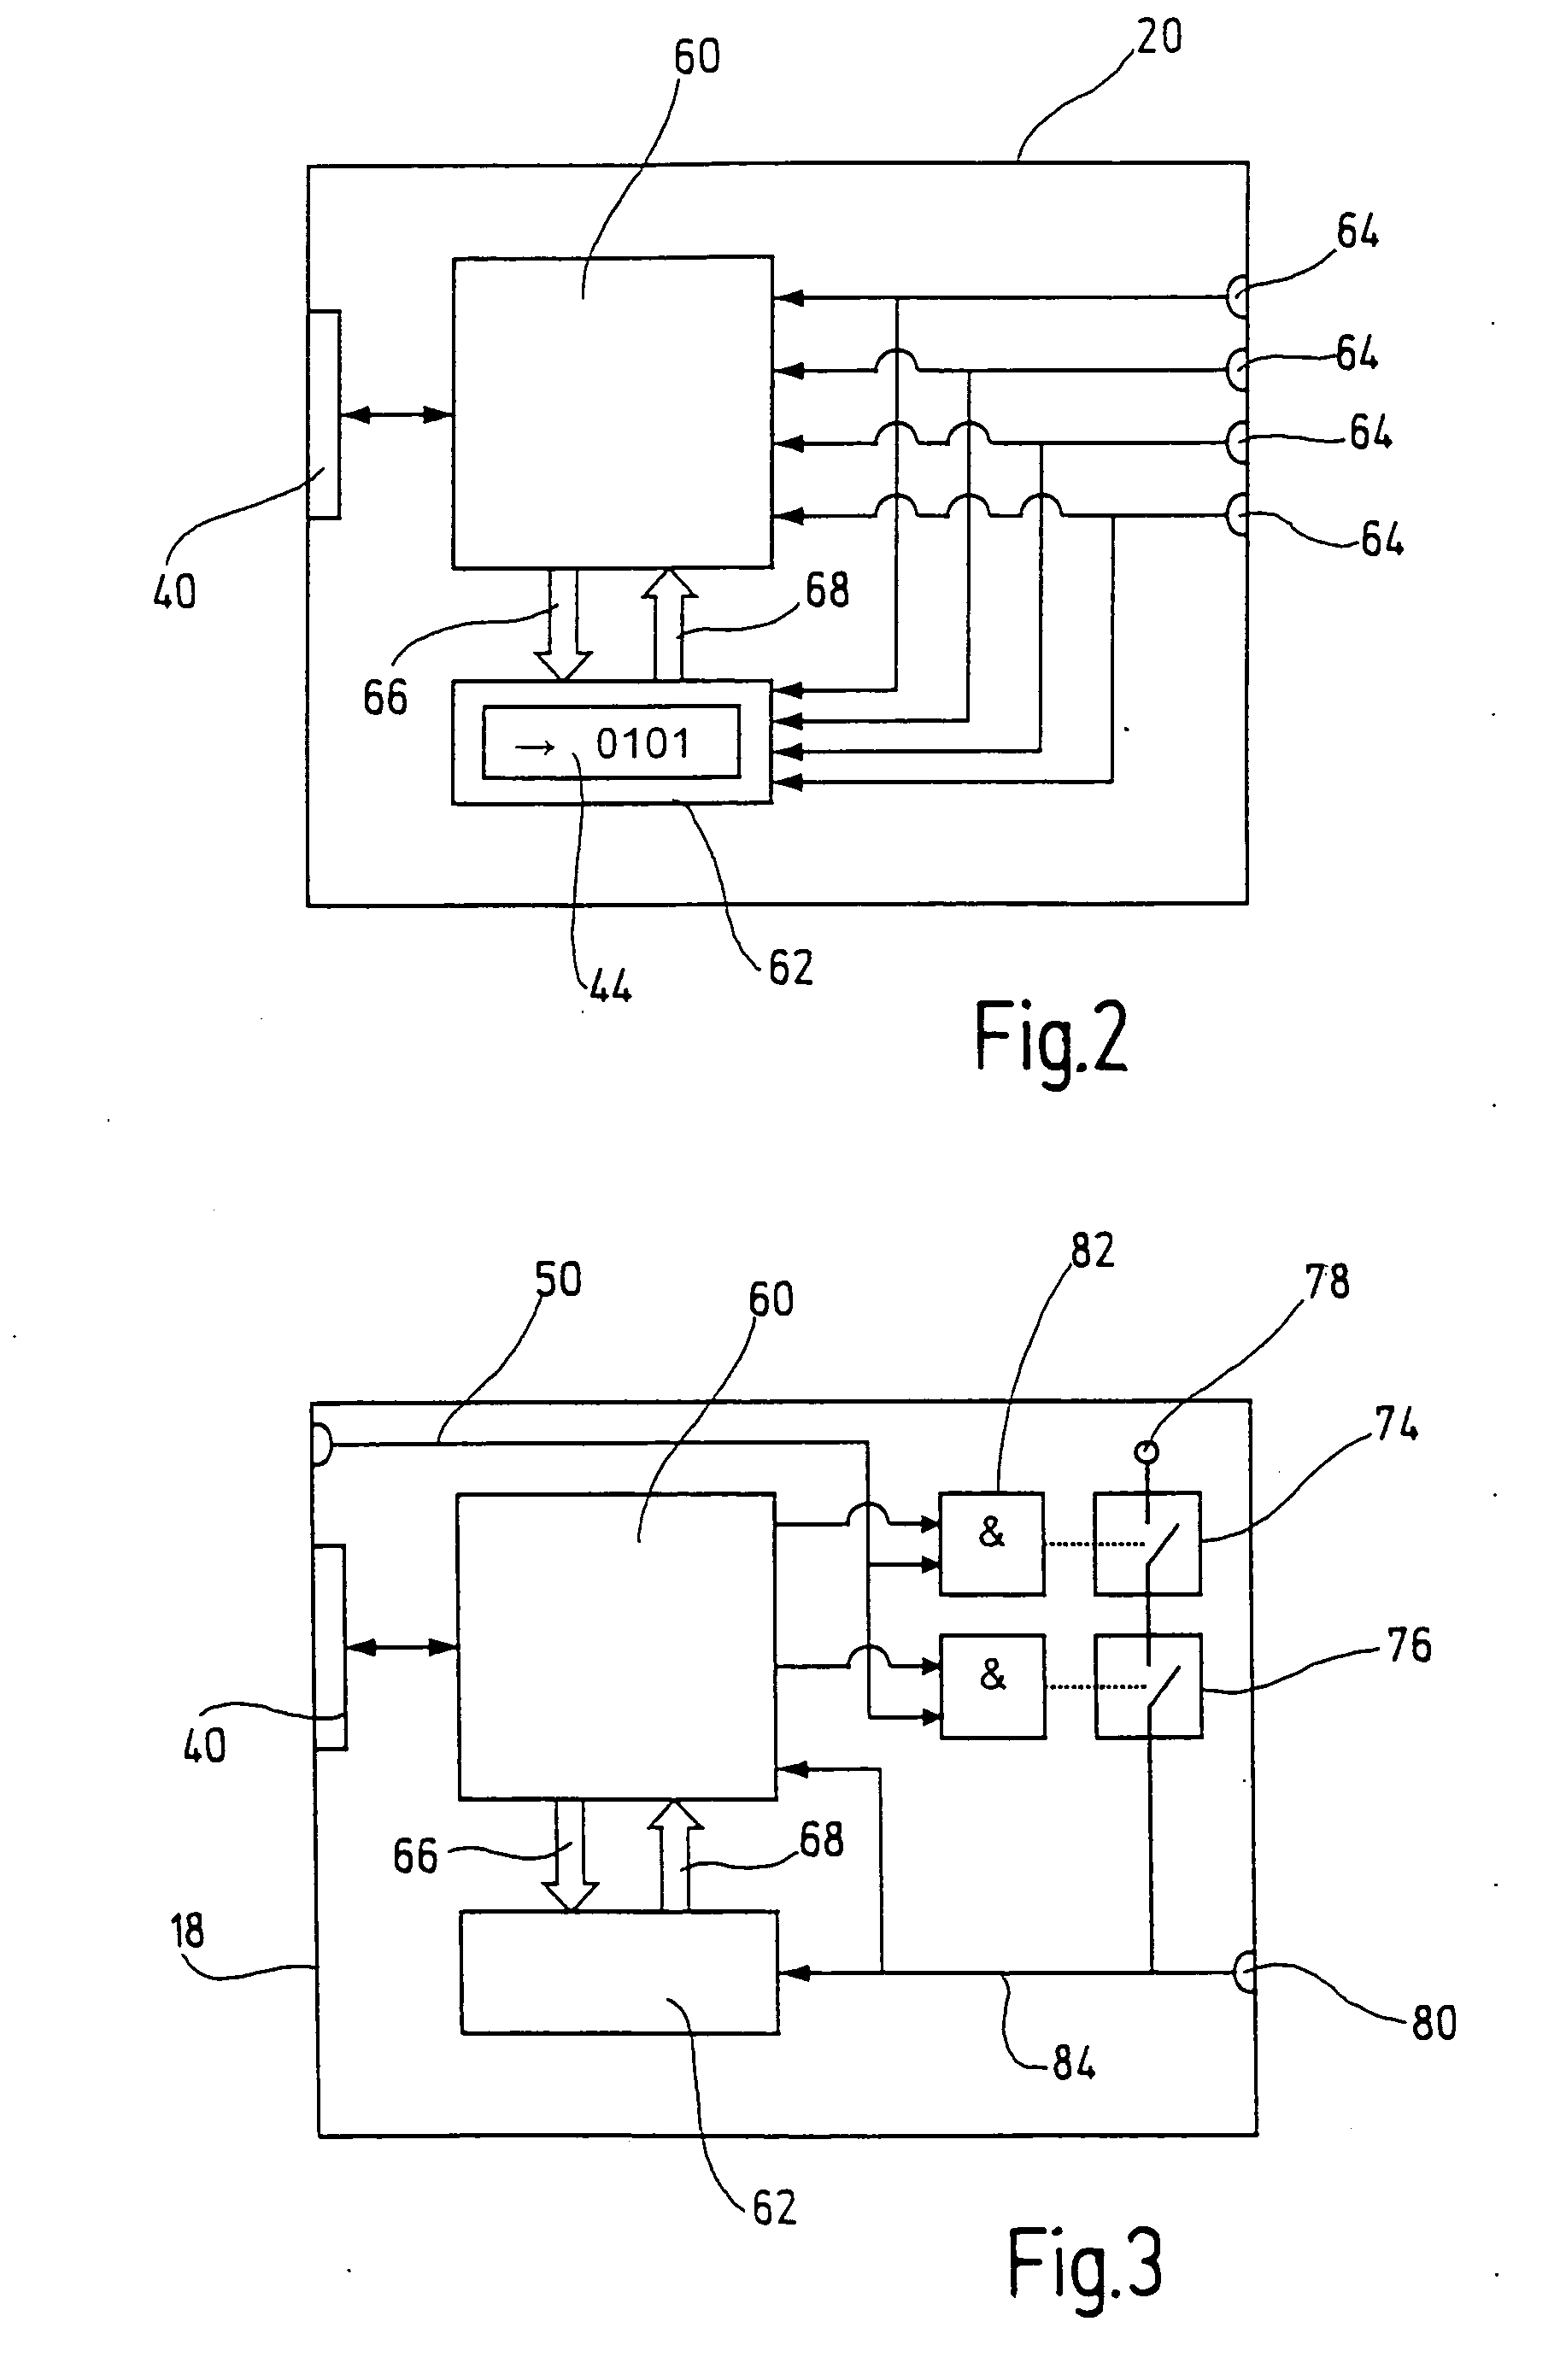 Method and apparatus for controlling a safety-critical process